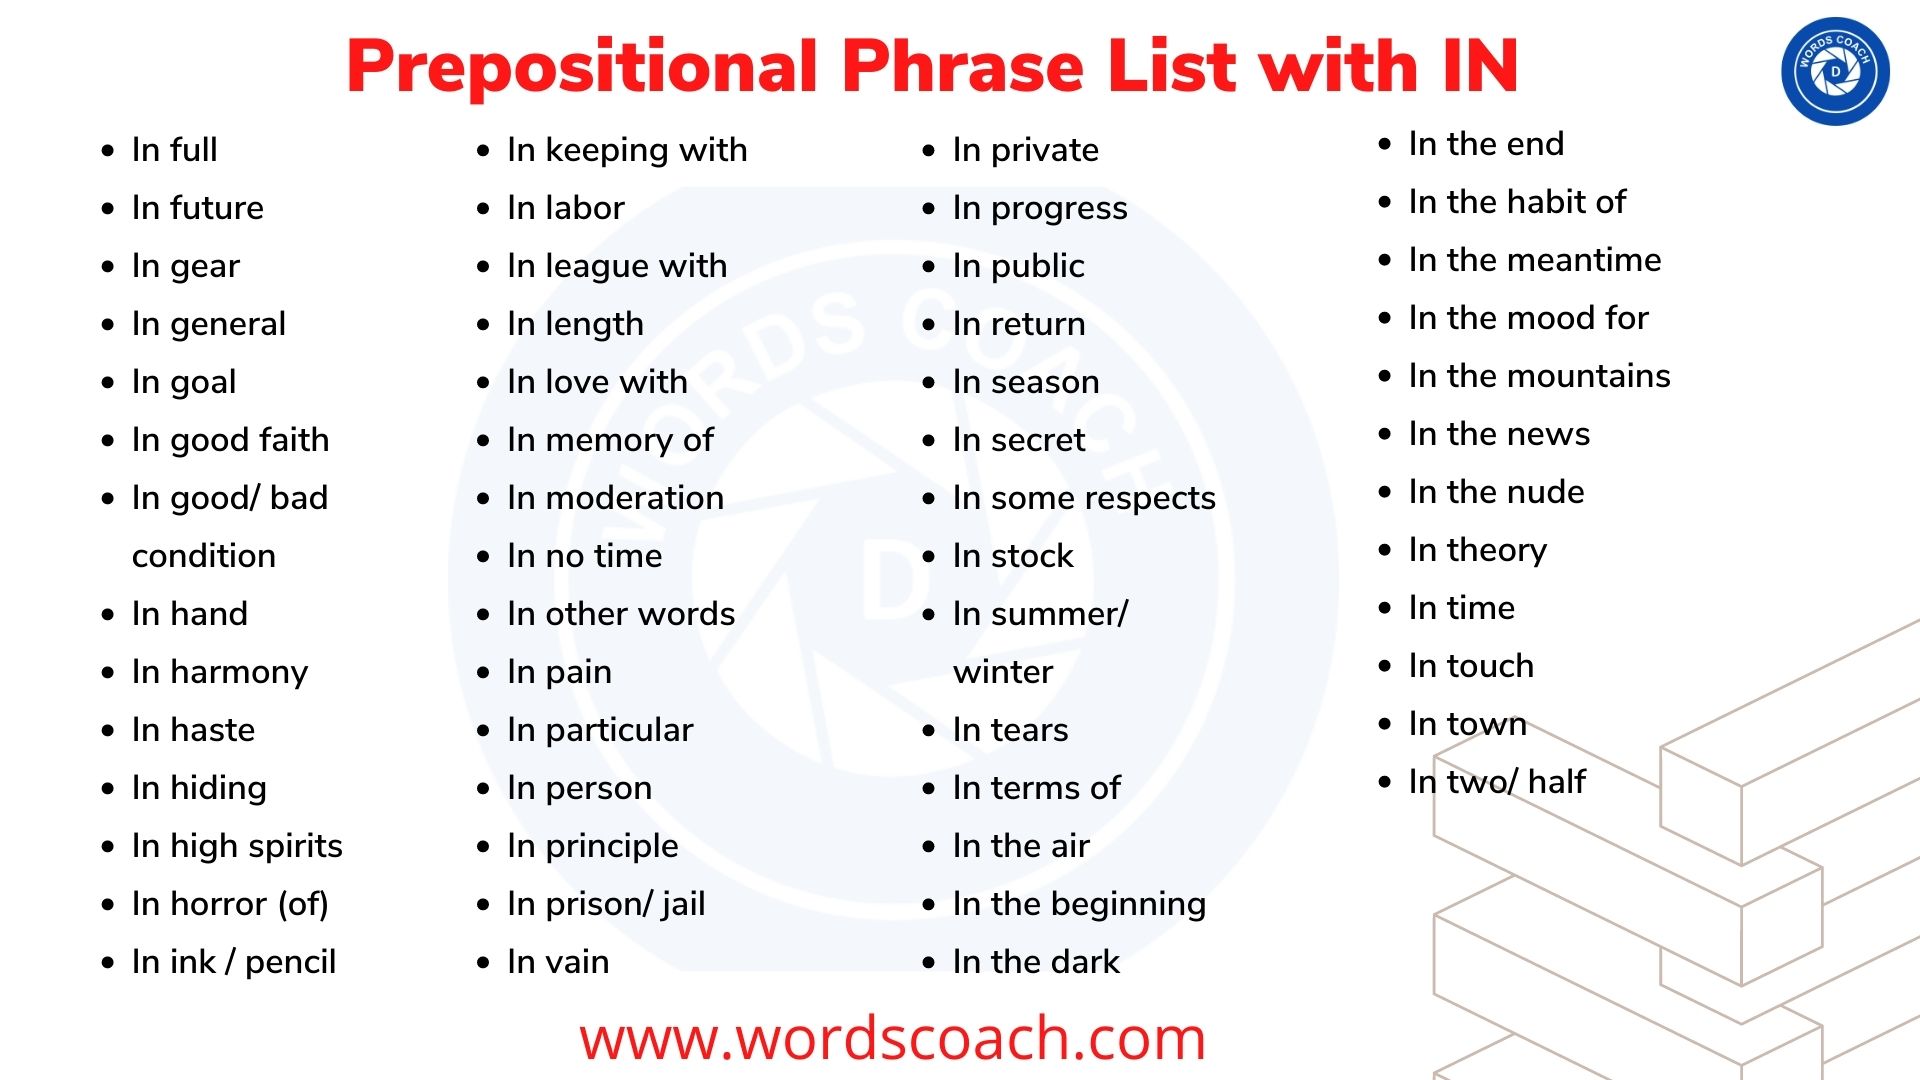 Prepositional Phrase List with IN